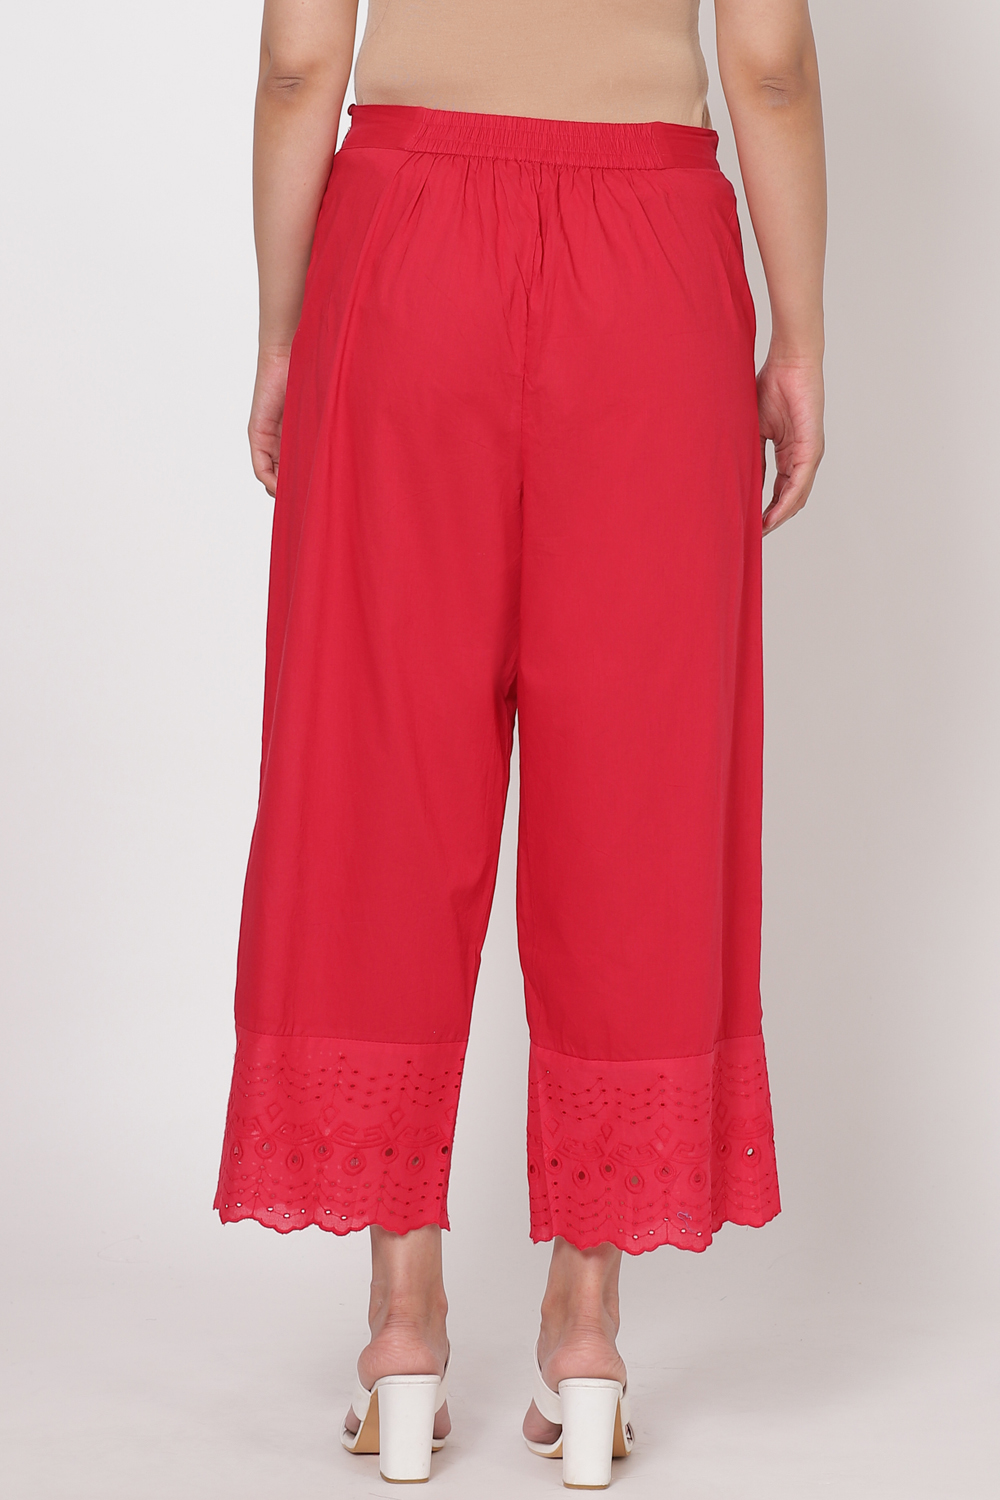 Buy Red Cotton Palazzo Pants (1N) for INR599.40